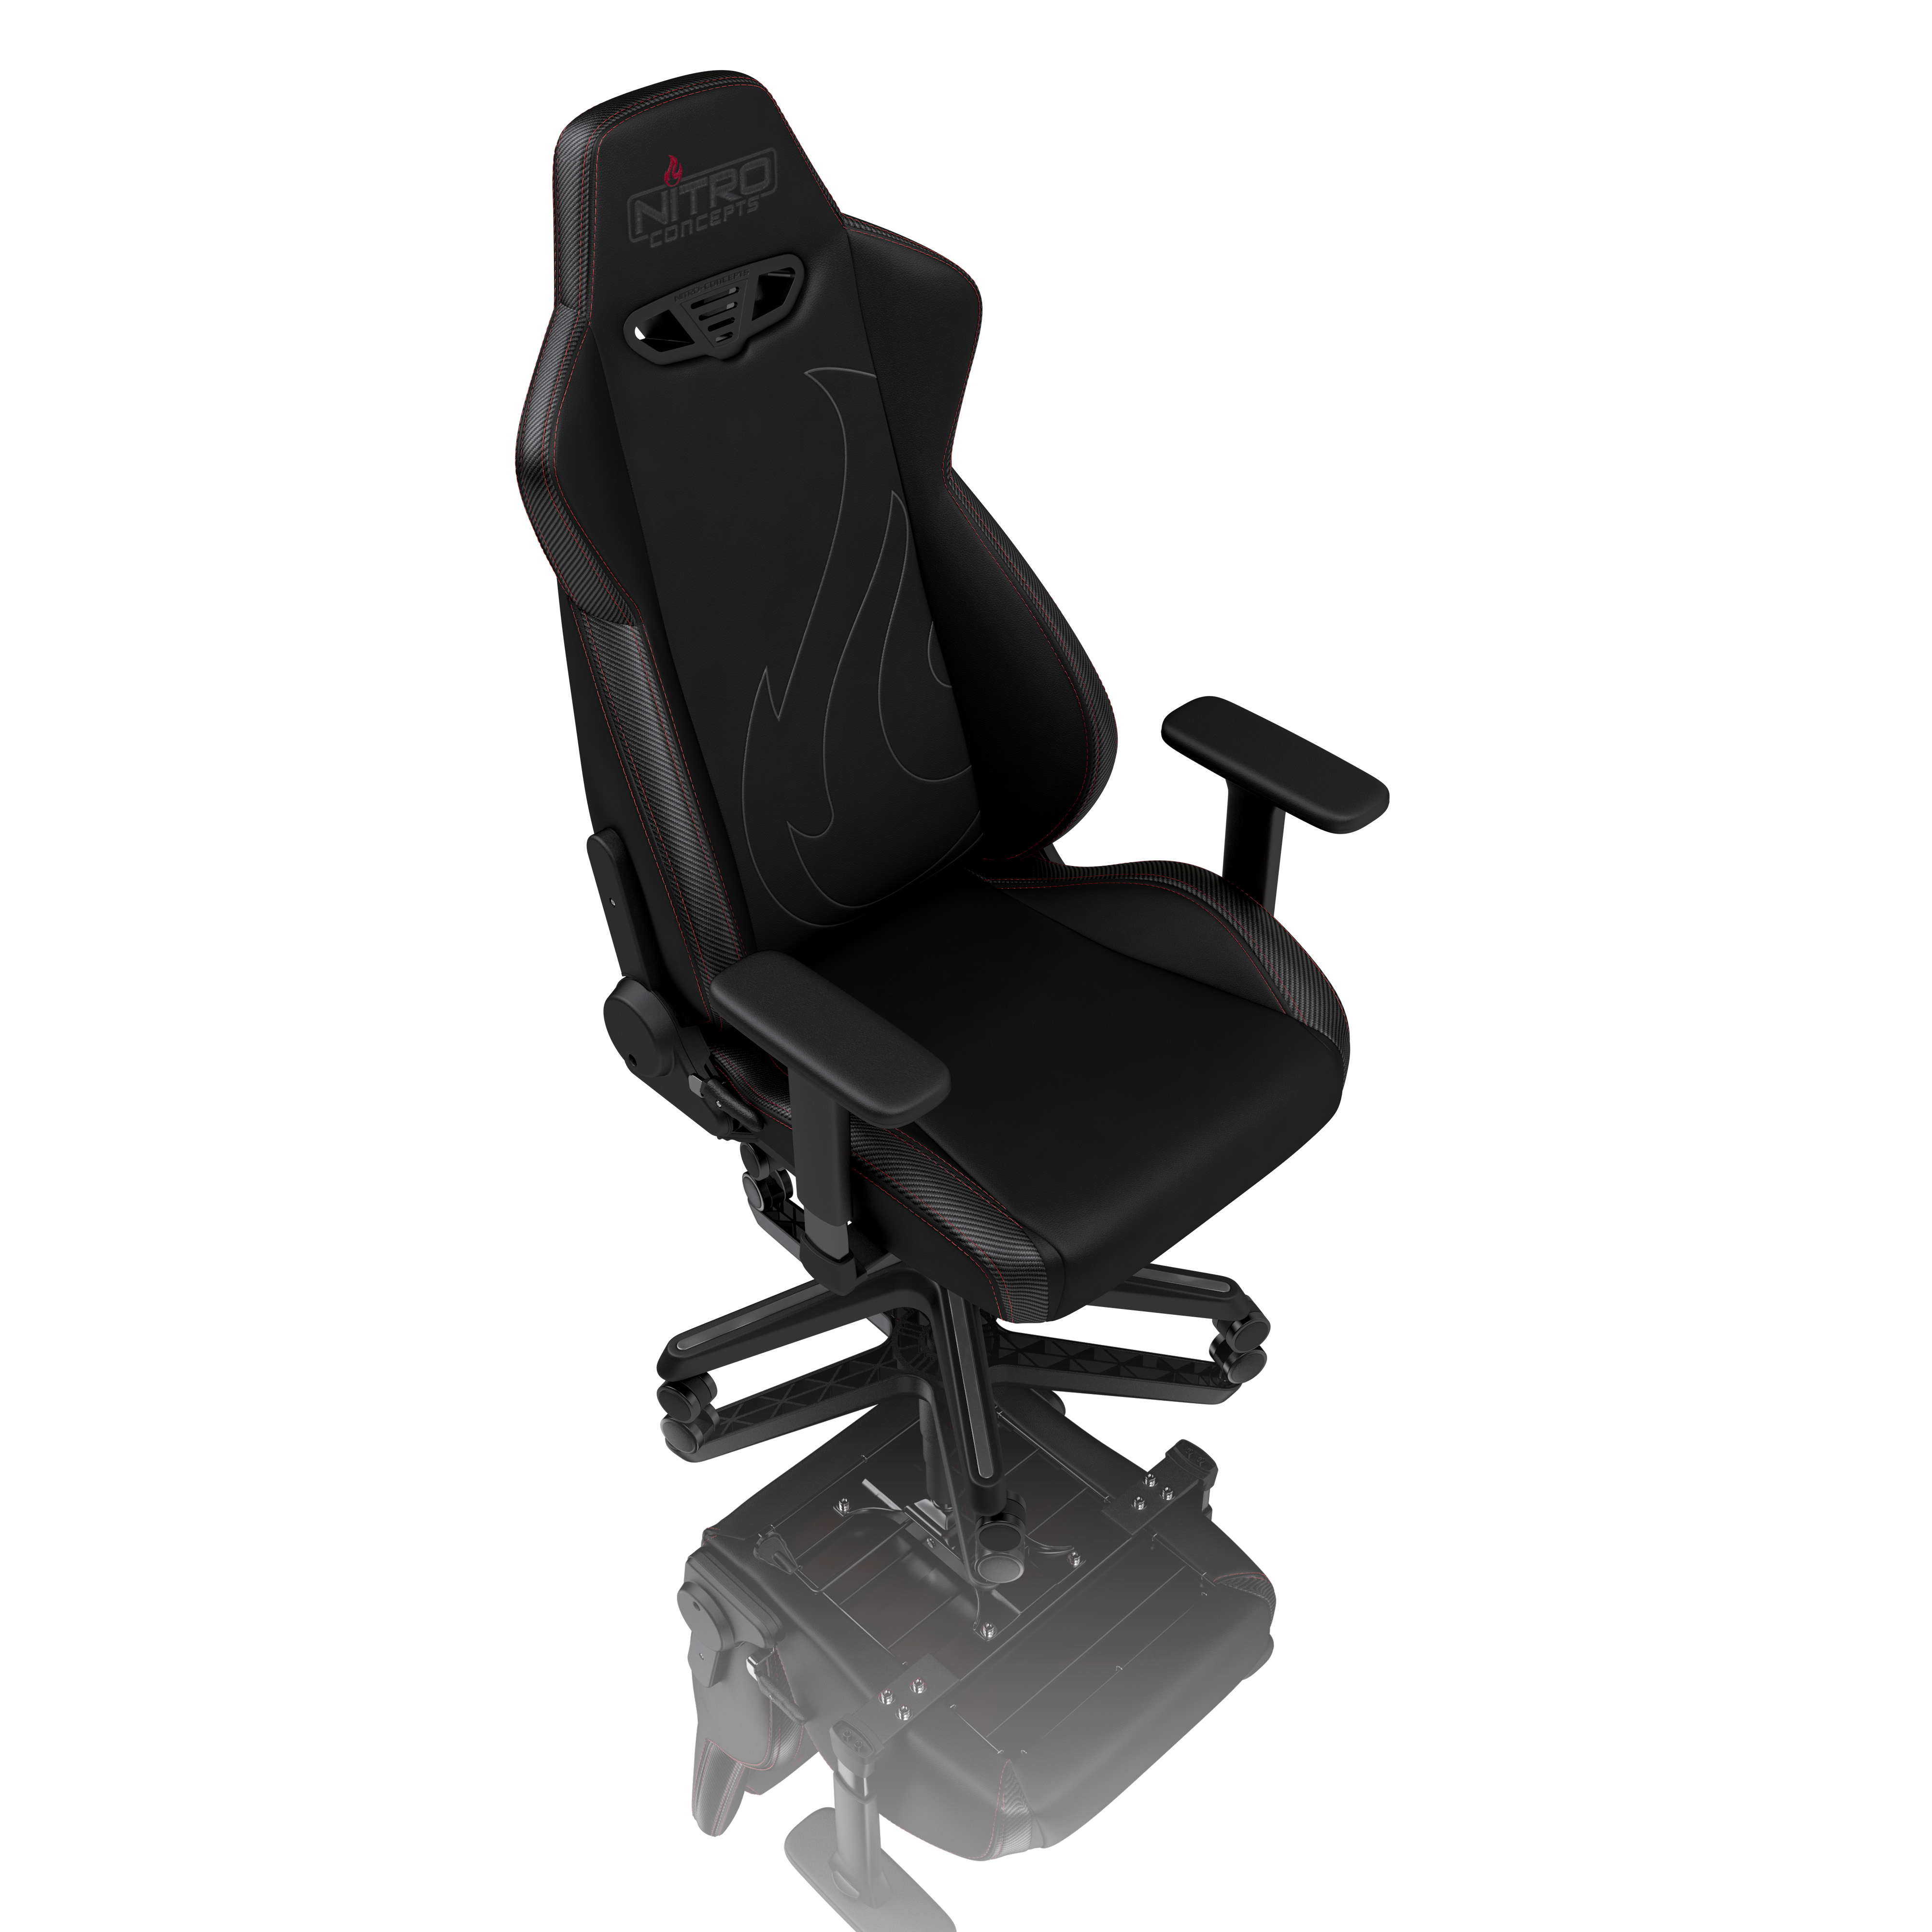 Cloth Cover Ergonomic Office Chair Stealth Black 90 To 135 Reclinable Adjustable Height Armrests Nitro Concepts S300 Gaming Chair Up To 135kg Users Chairs Sofas Office Furniture Lighting